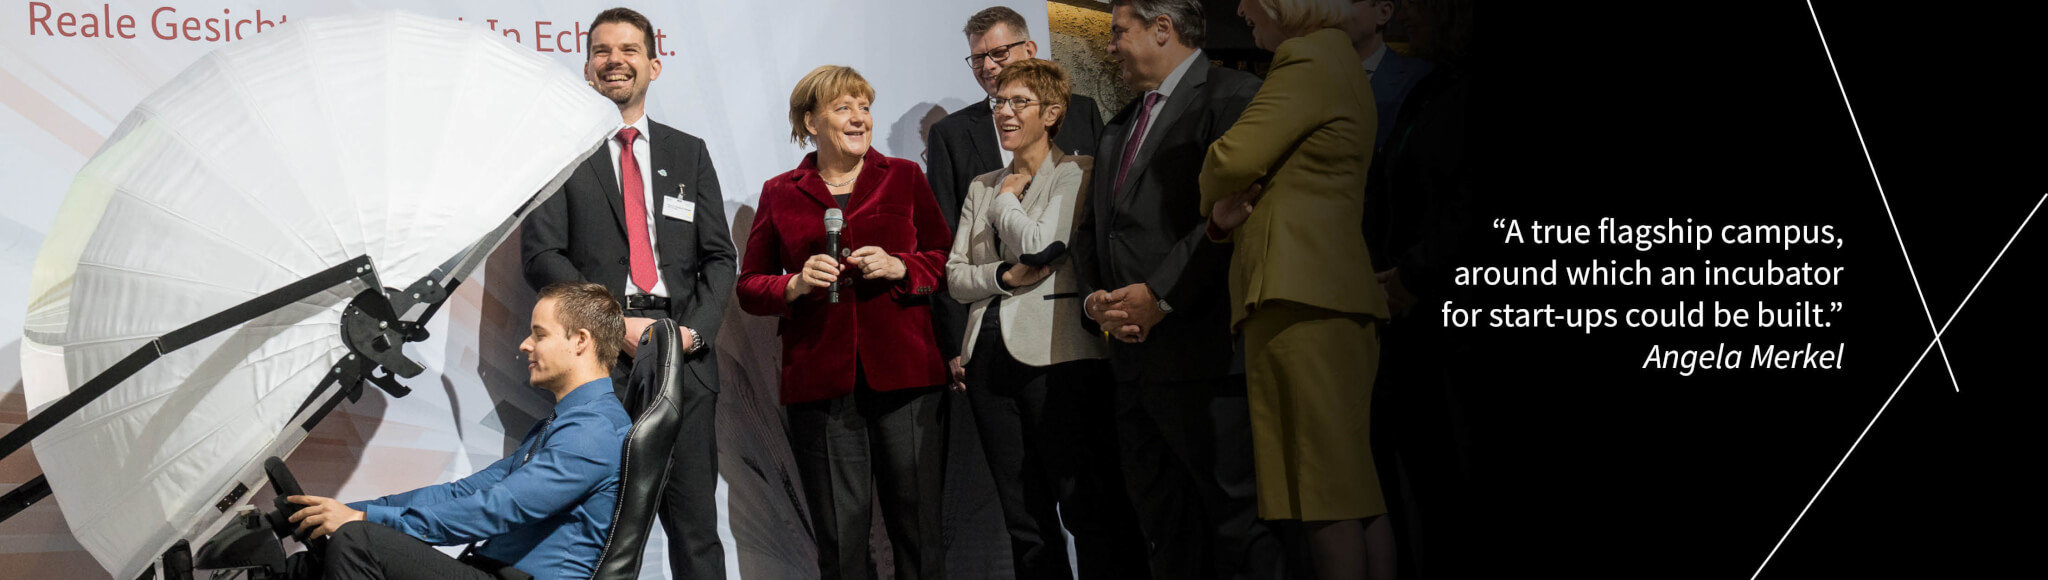 "A true flagship campus, around which an incubator for start-ups could be built." - Angela Merkel